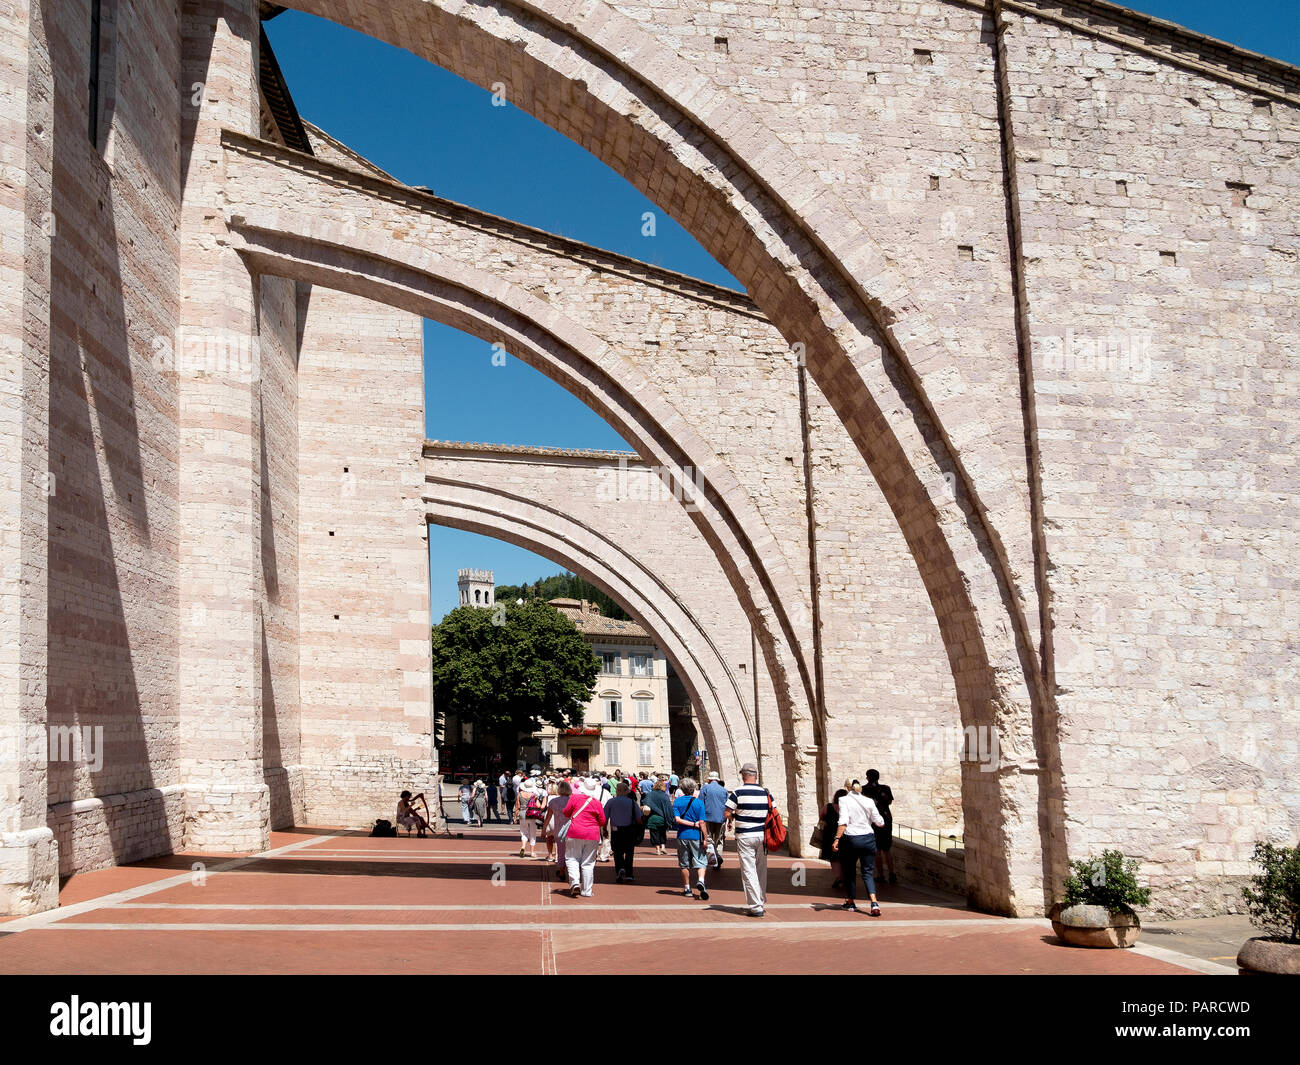 Archways leading to the town center  in the medieval city  of Assisi, in the Province of Perugia, Italy Stock Photo